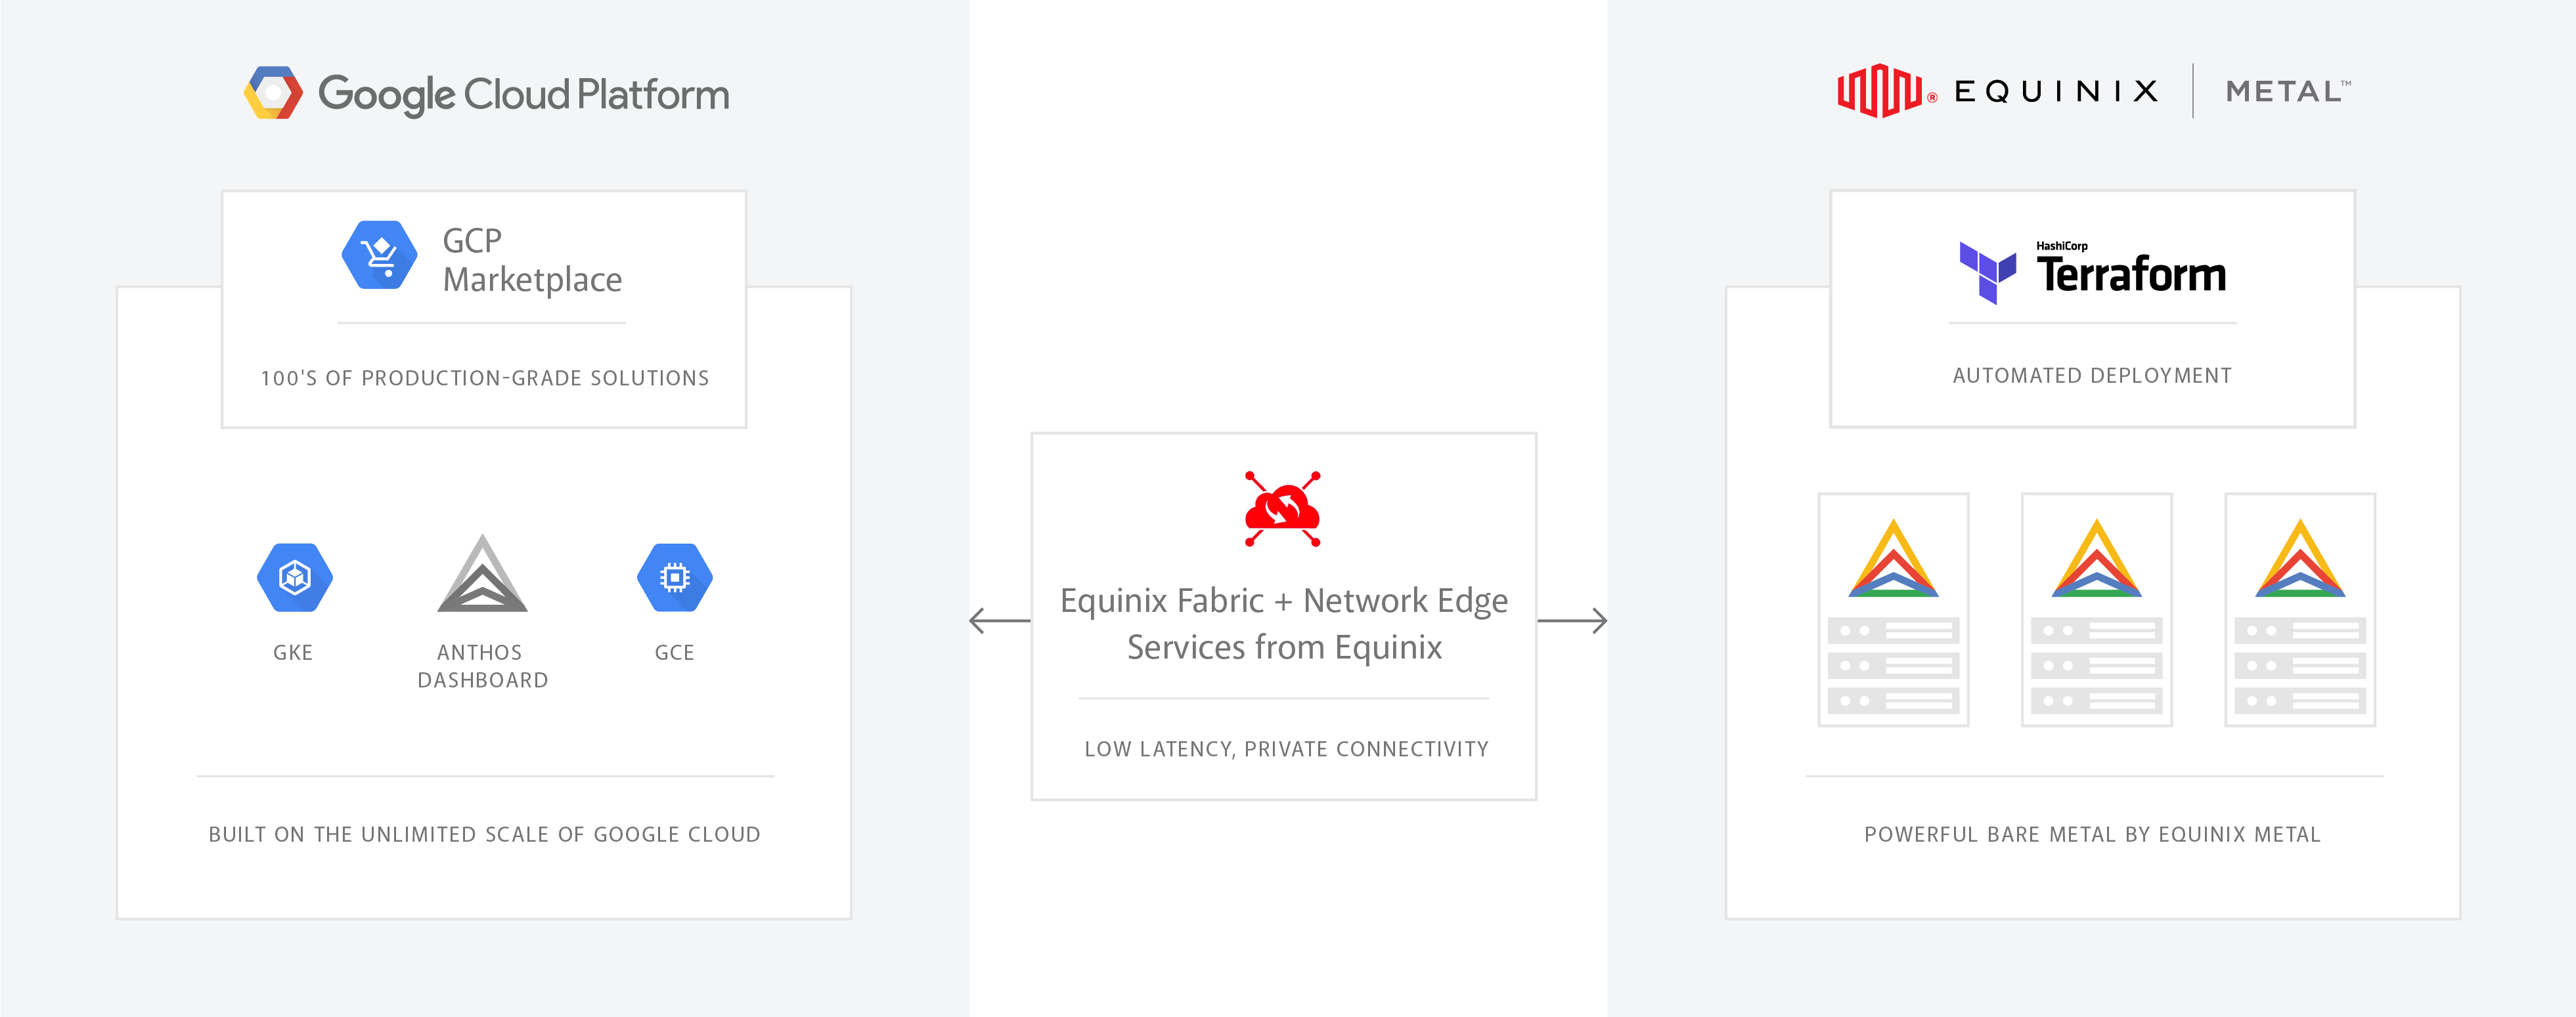 Diagram showing how Equinix Fabric + Network Edge Services from Equinix working with both Google Cloud Platform and Equinix Metal